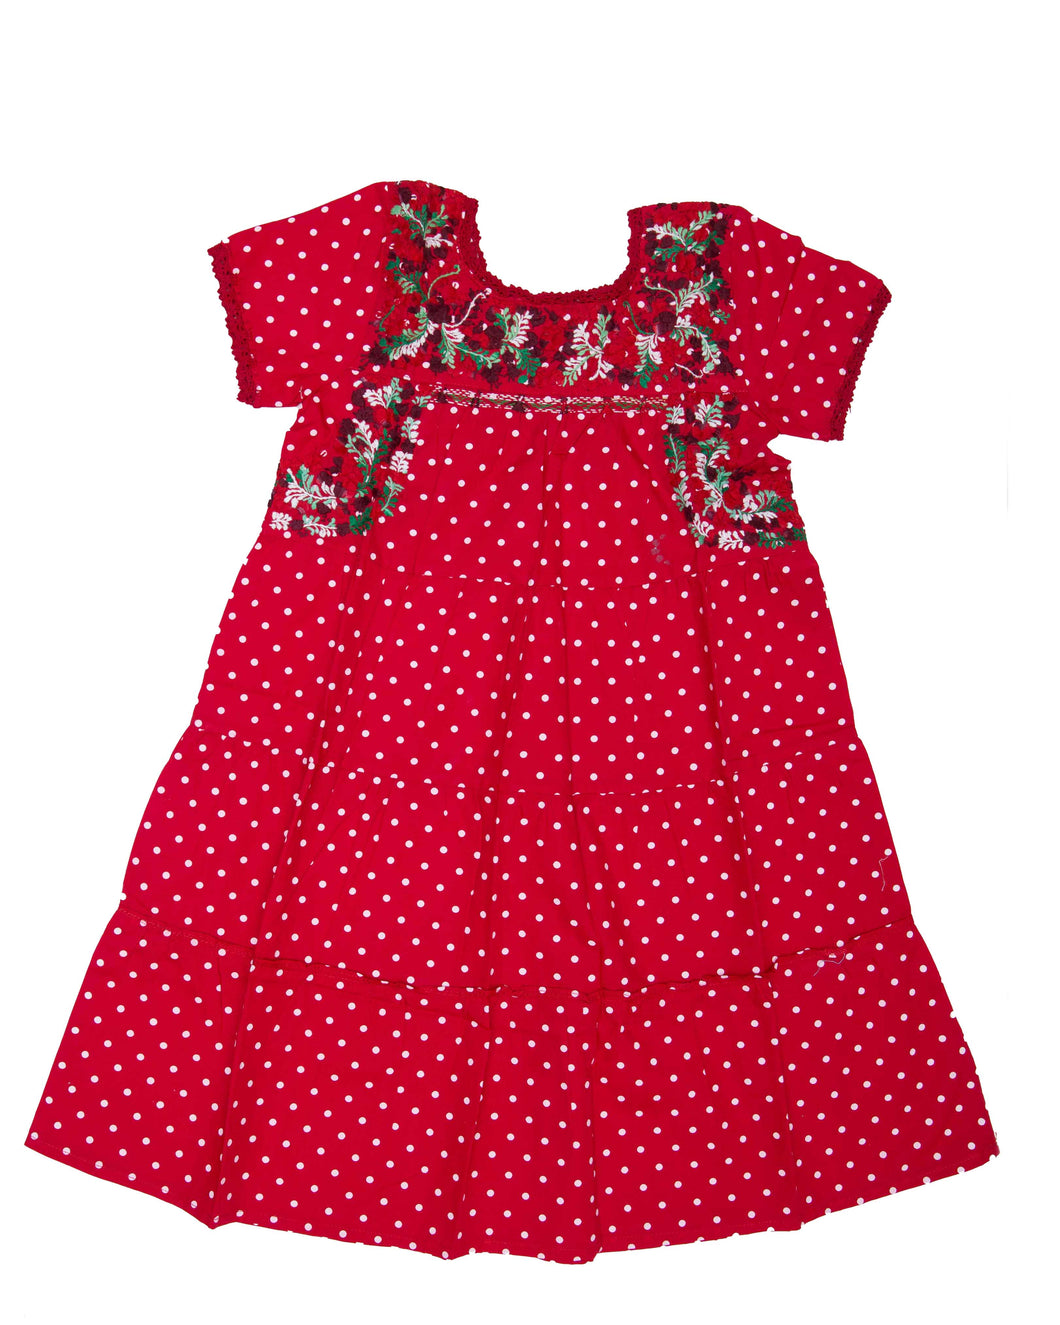 Girls Gabriela Dress | Red & White Polka Dot with Red Ombre